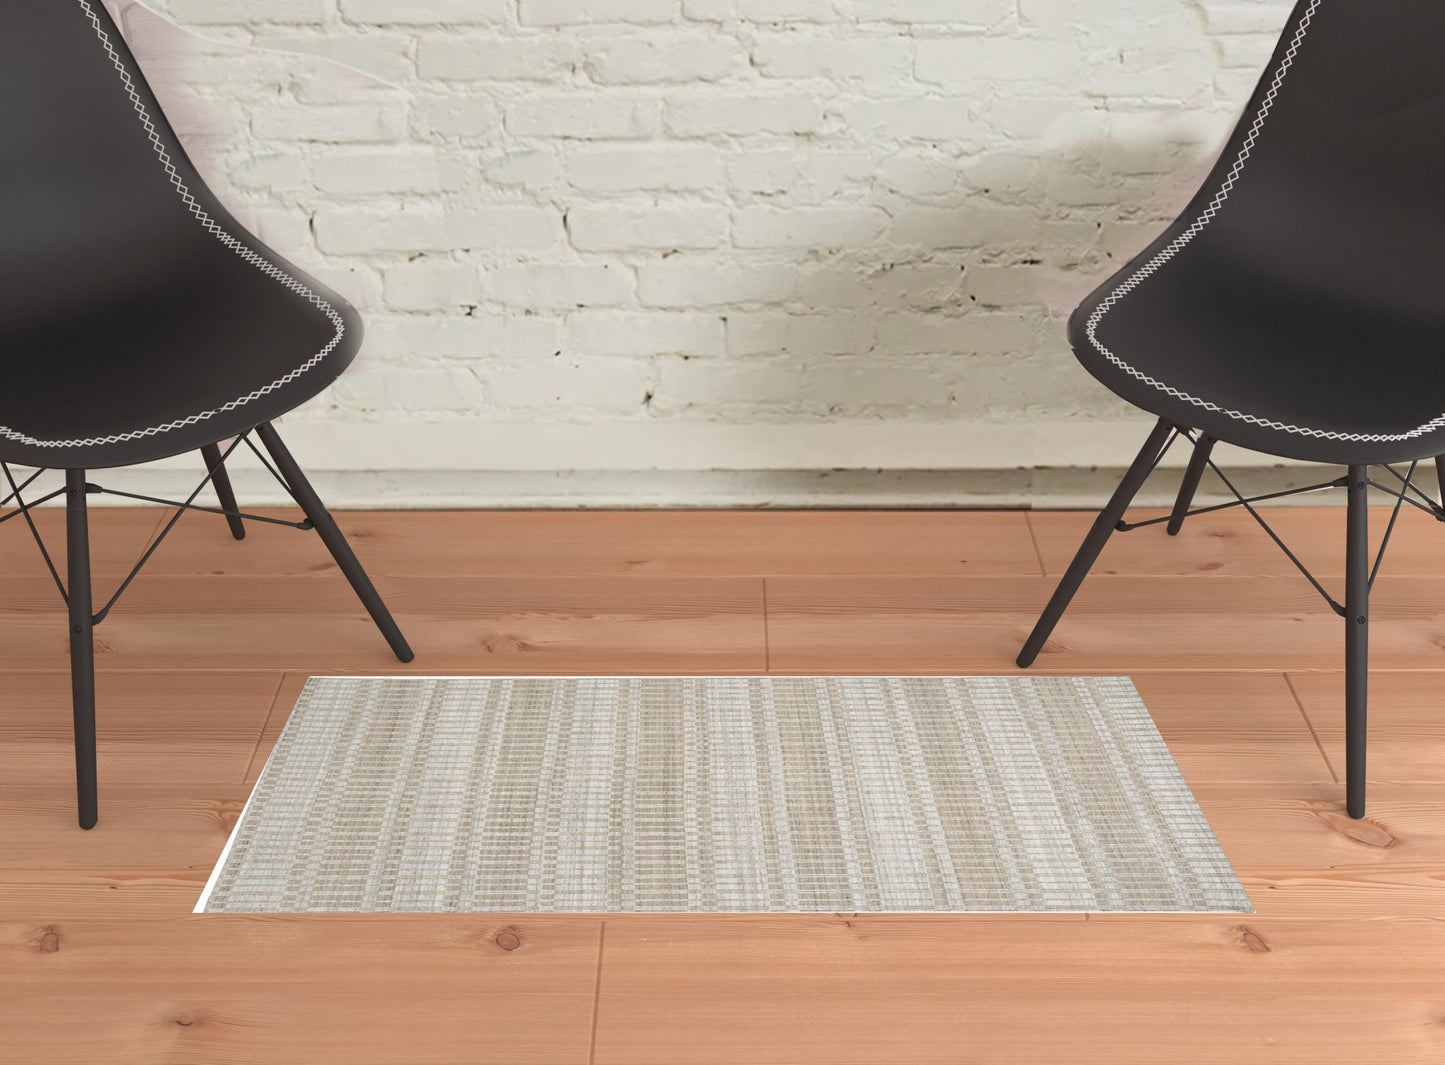 5' X 8' Ivory Taupe And Tan Striped Hand Woven Area Rug